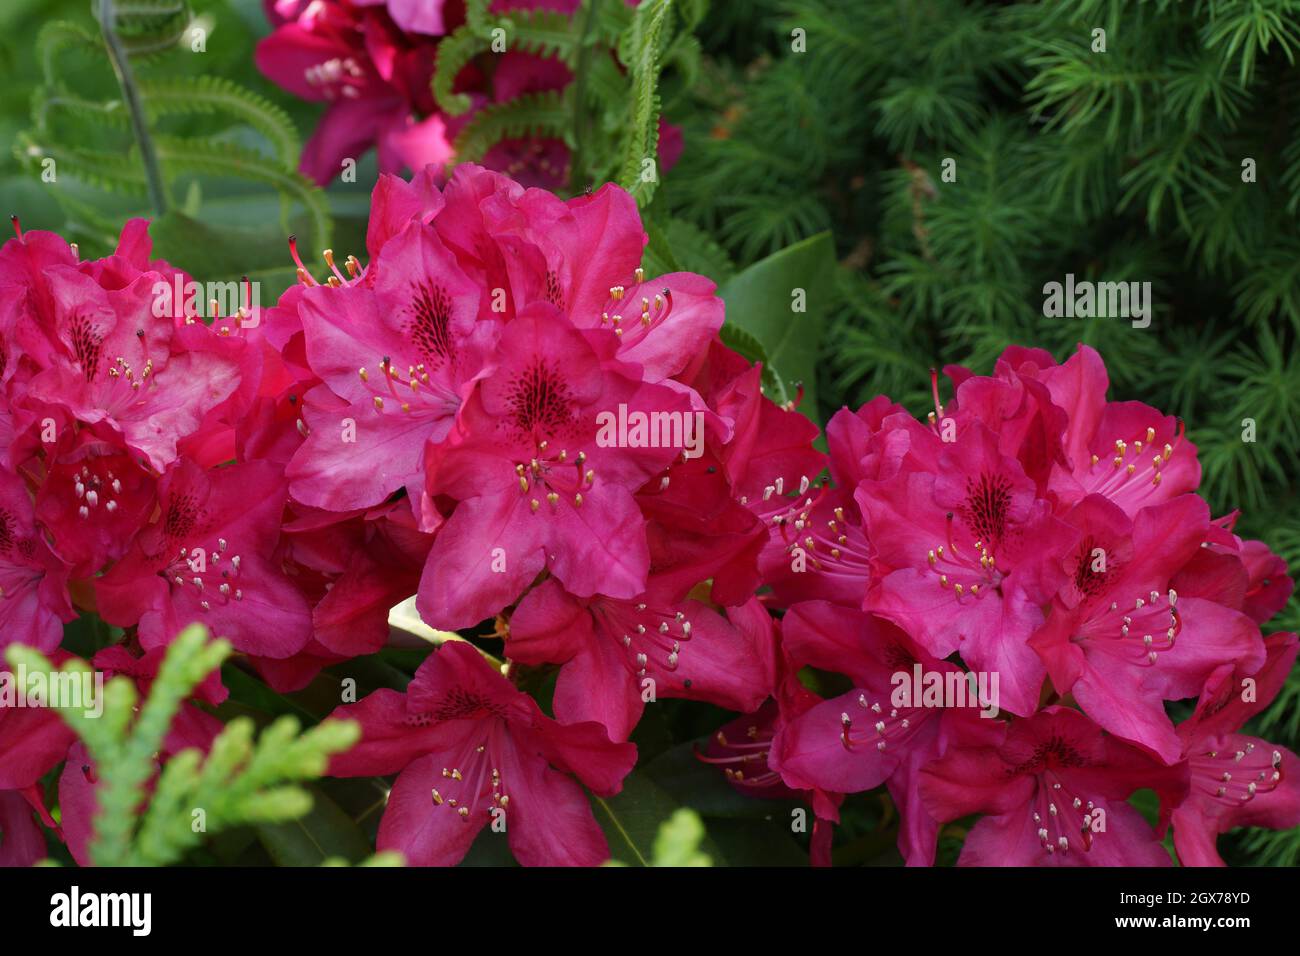 Red flowers on a green background.  Rhododendron Nova Zembla. Flower close-up. Stock Photo